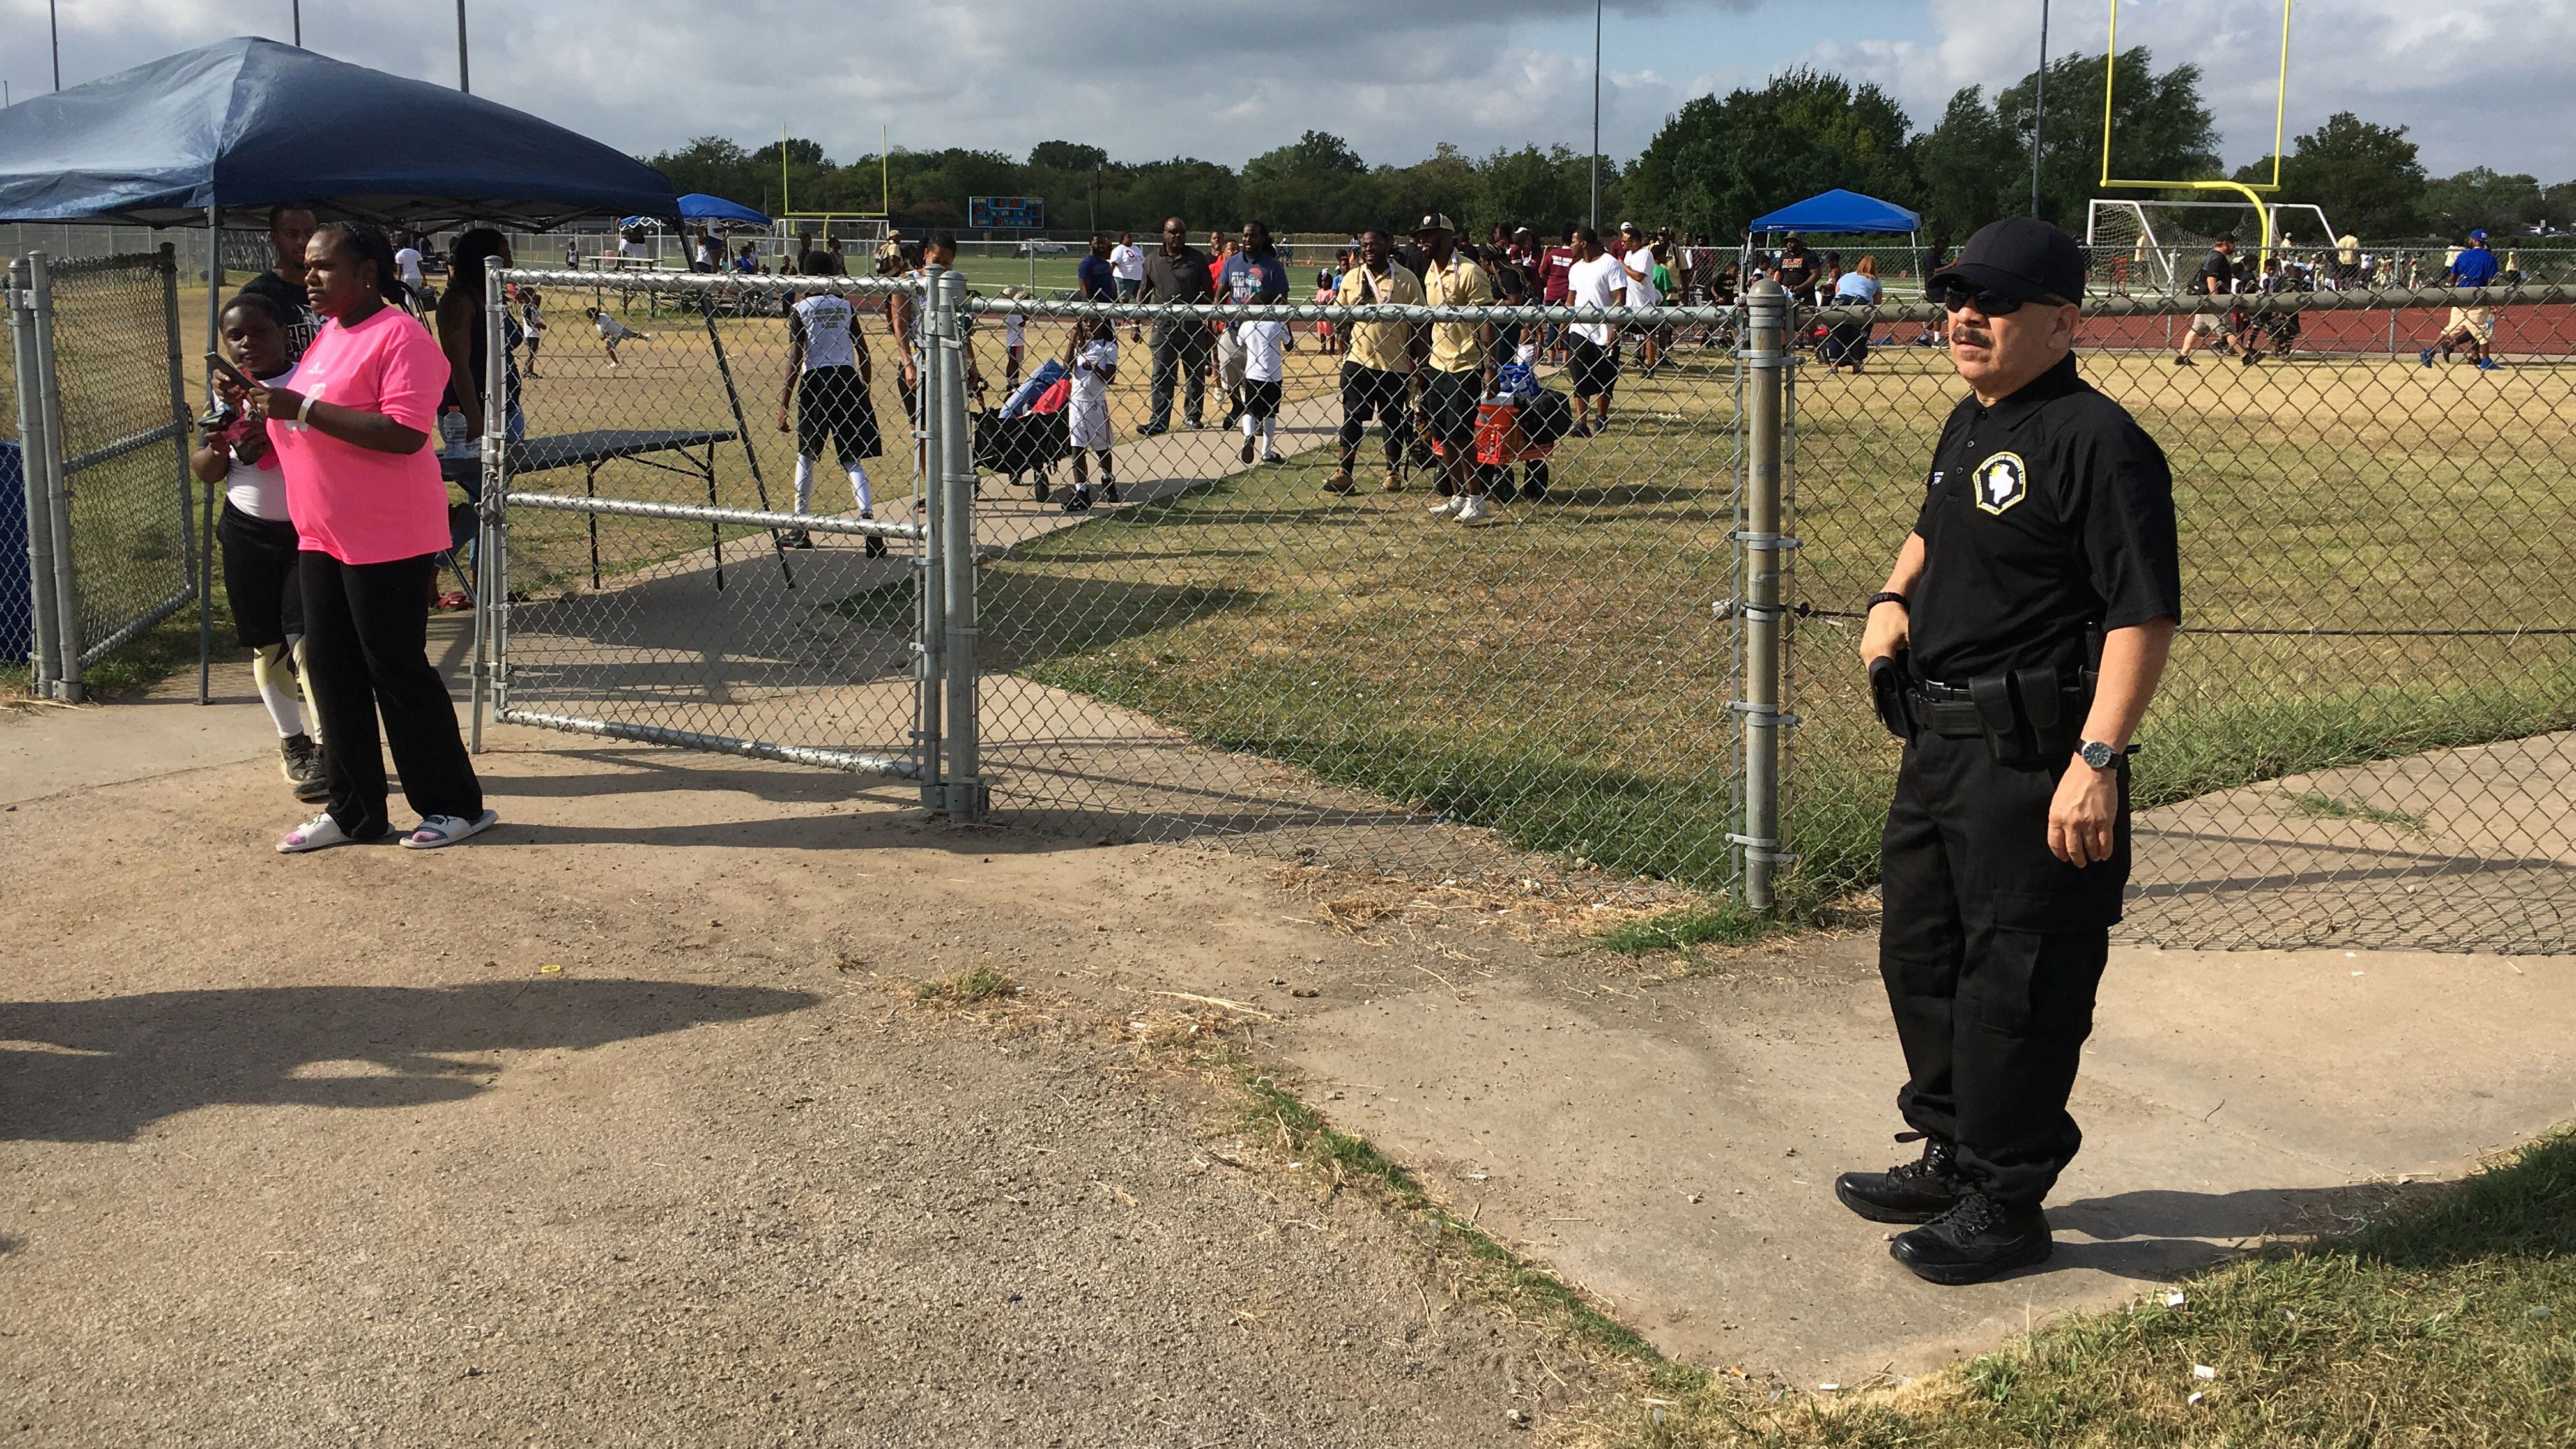 Armed Guards Now Watching Over Peewee Football Games